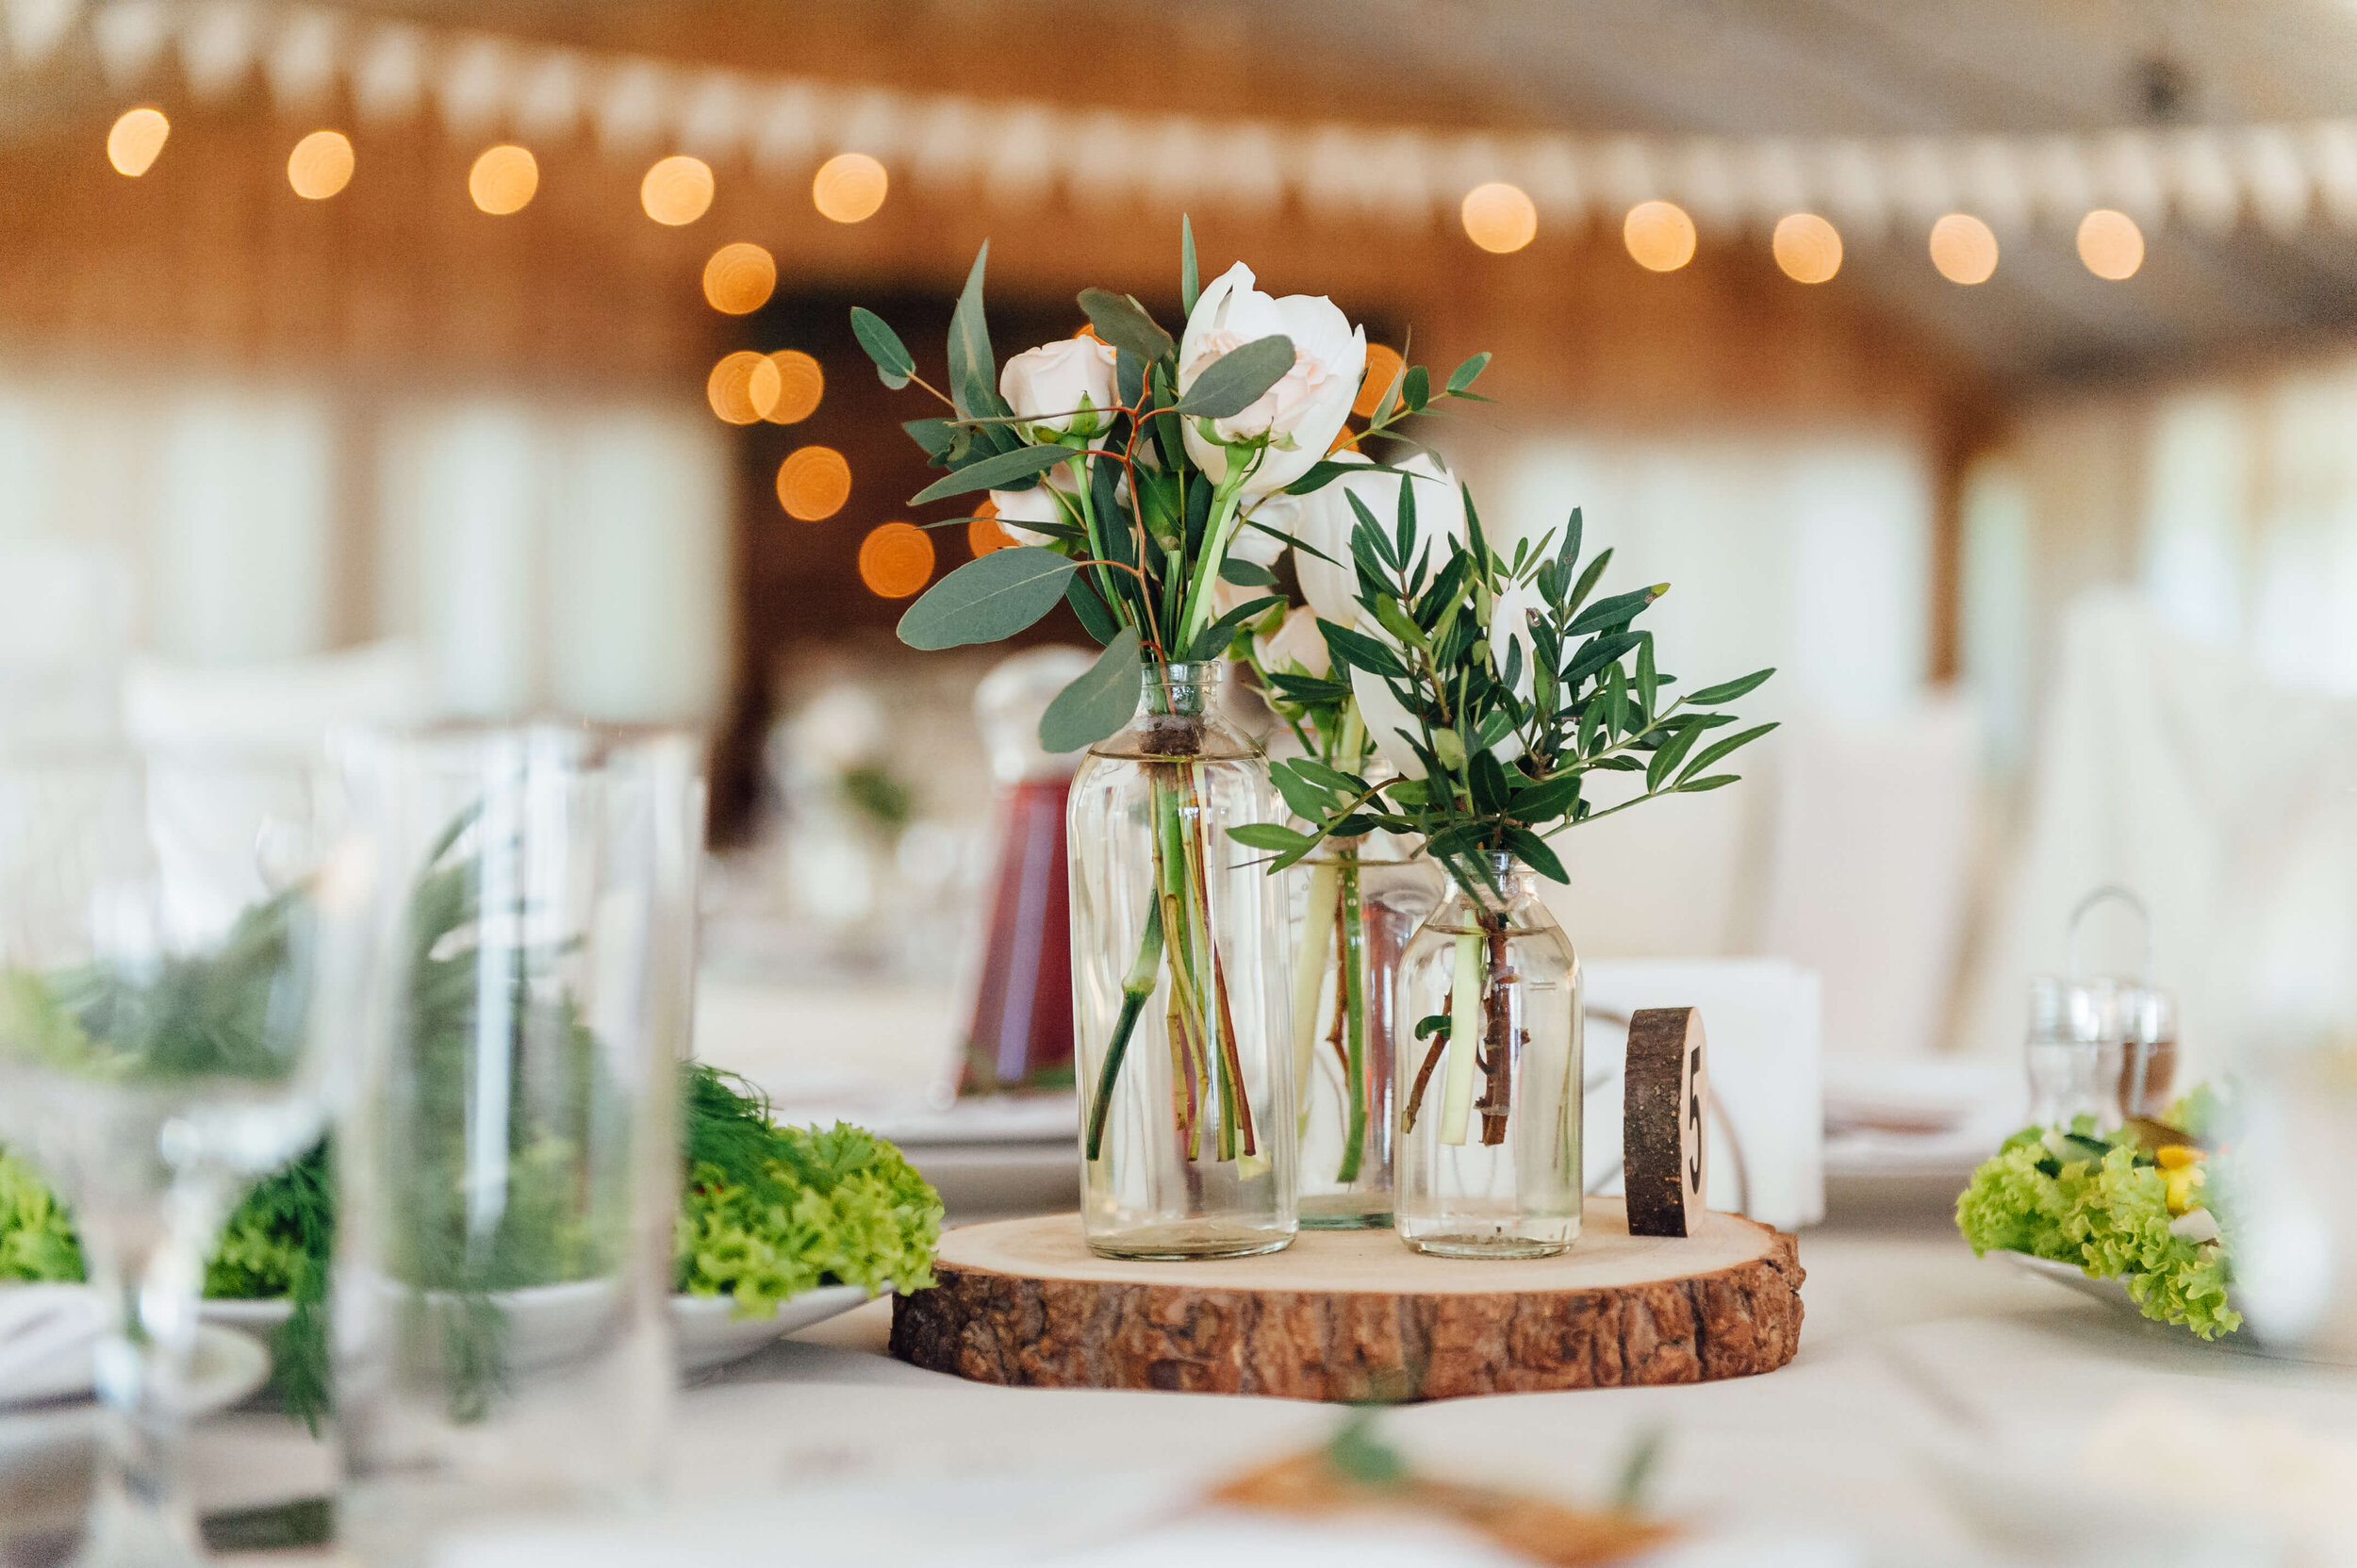 Diy table decorations for wedding